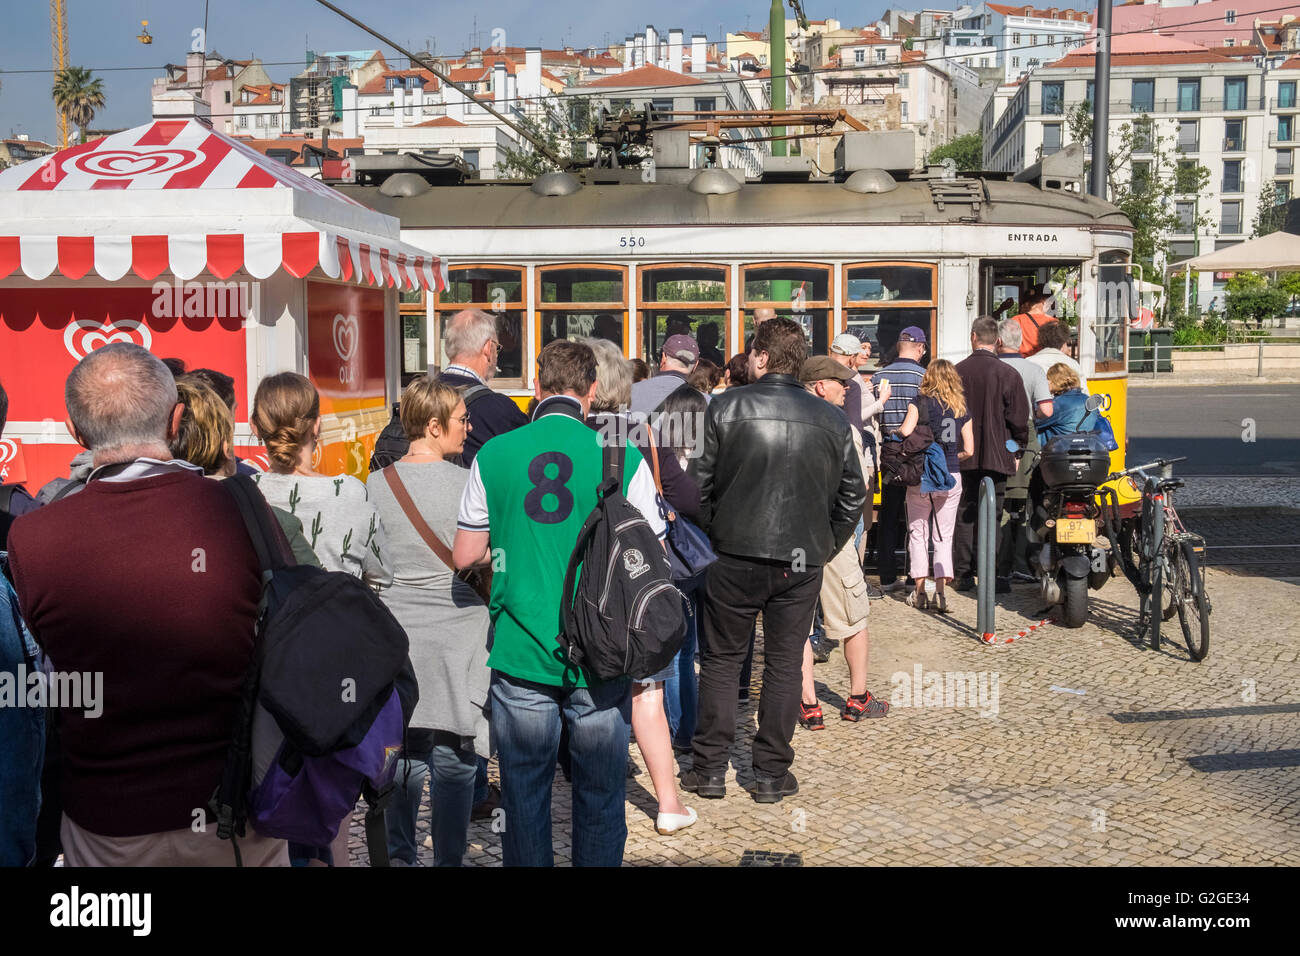 Tourists in a large queue waiting for popular number 28 Tram, Lisbon, Portugal Stock Photo